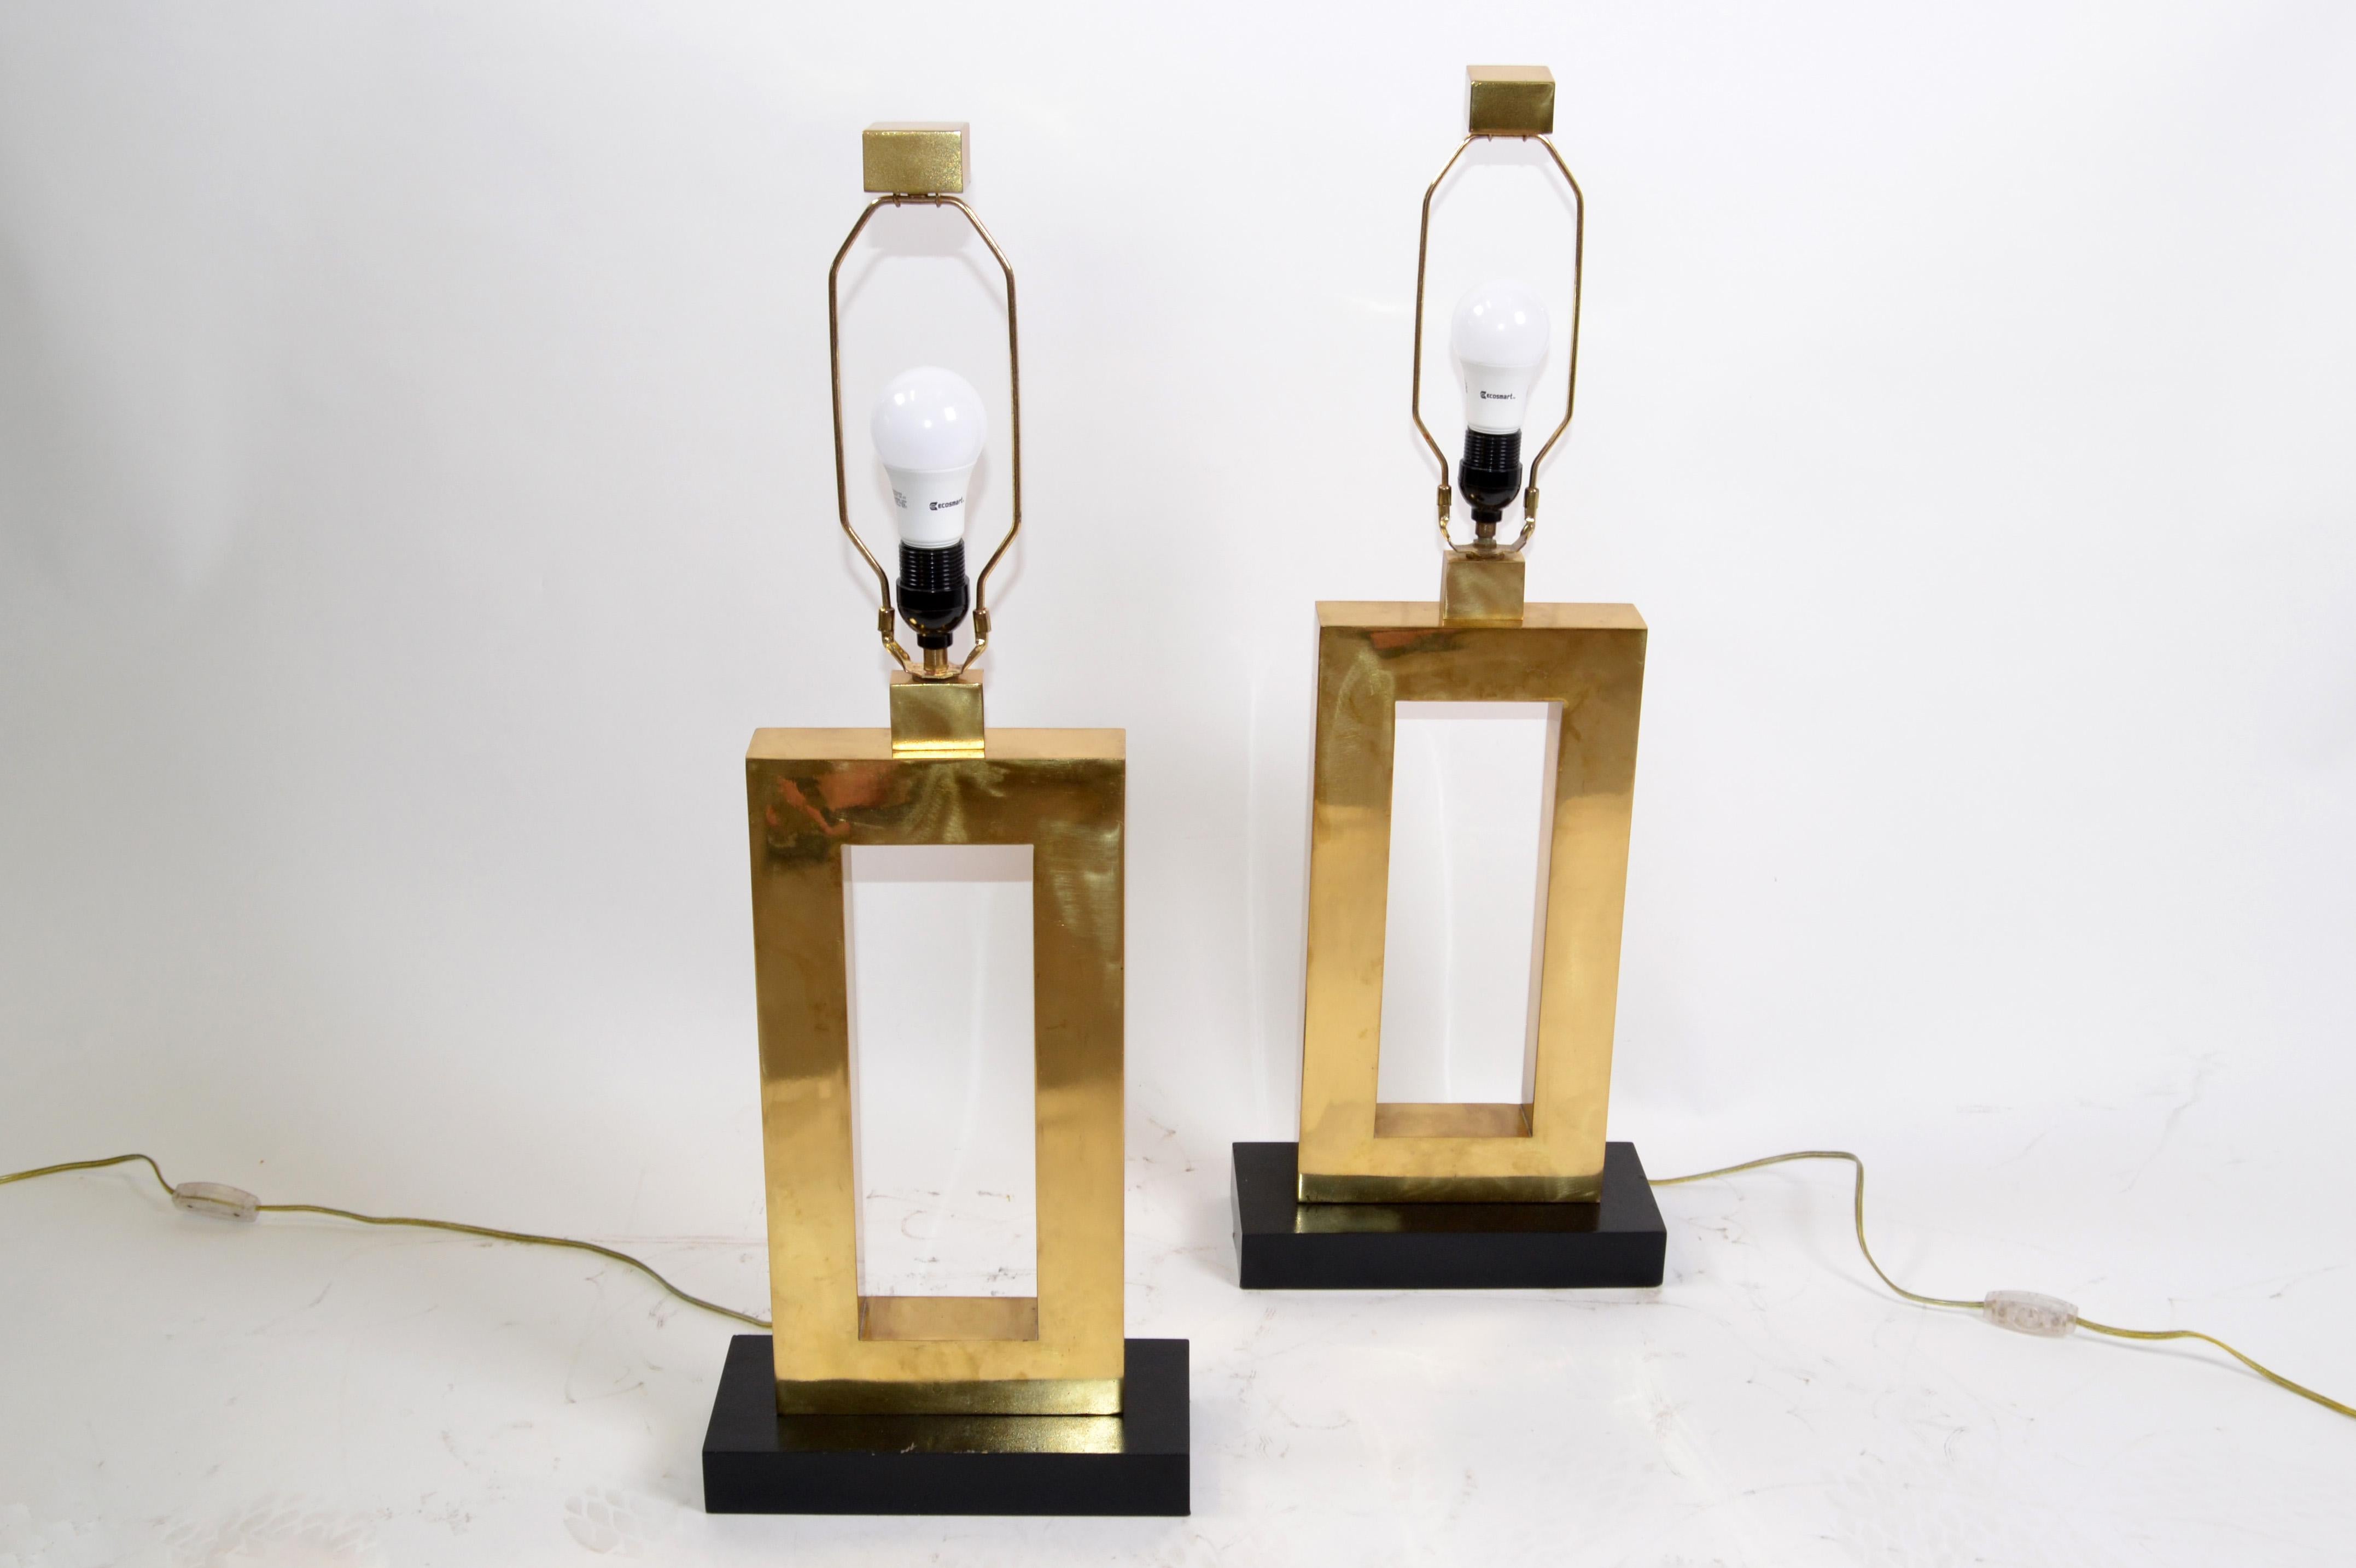 A pair of Mid-Century Modern big scale brass and ebonized wood rectangular solid brass table lamps.
The Pair comes with Harps, matching finials and is heavy.
In perfect working condition and each uses a max. 60 watts light bulb.
They have a